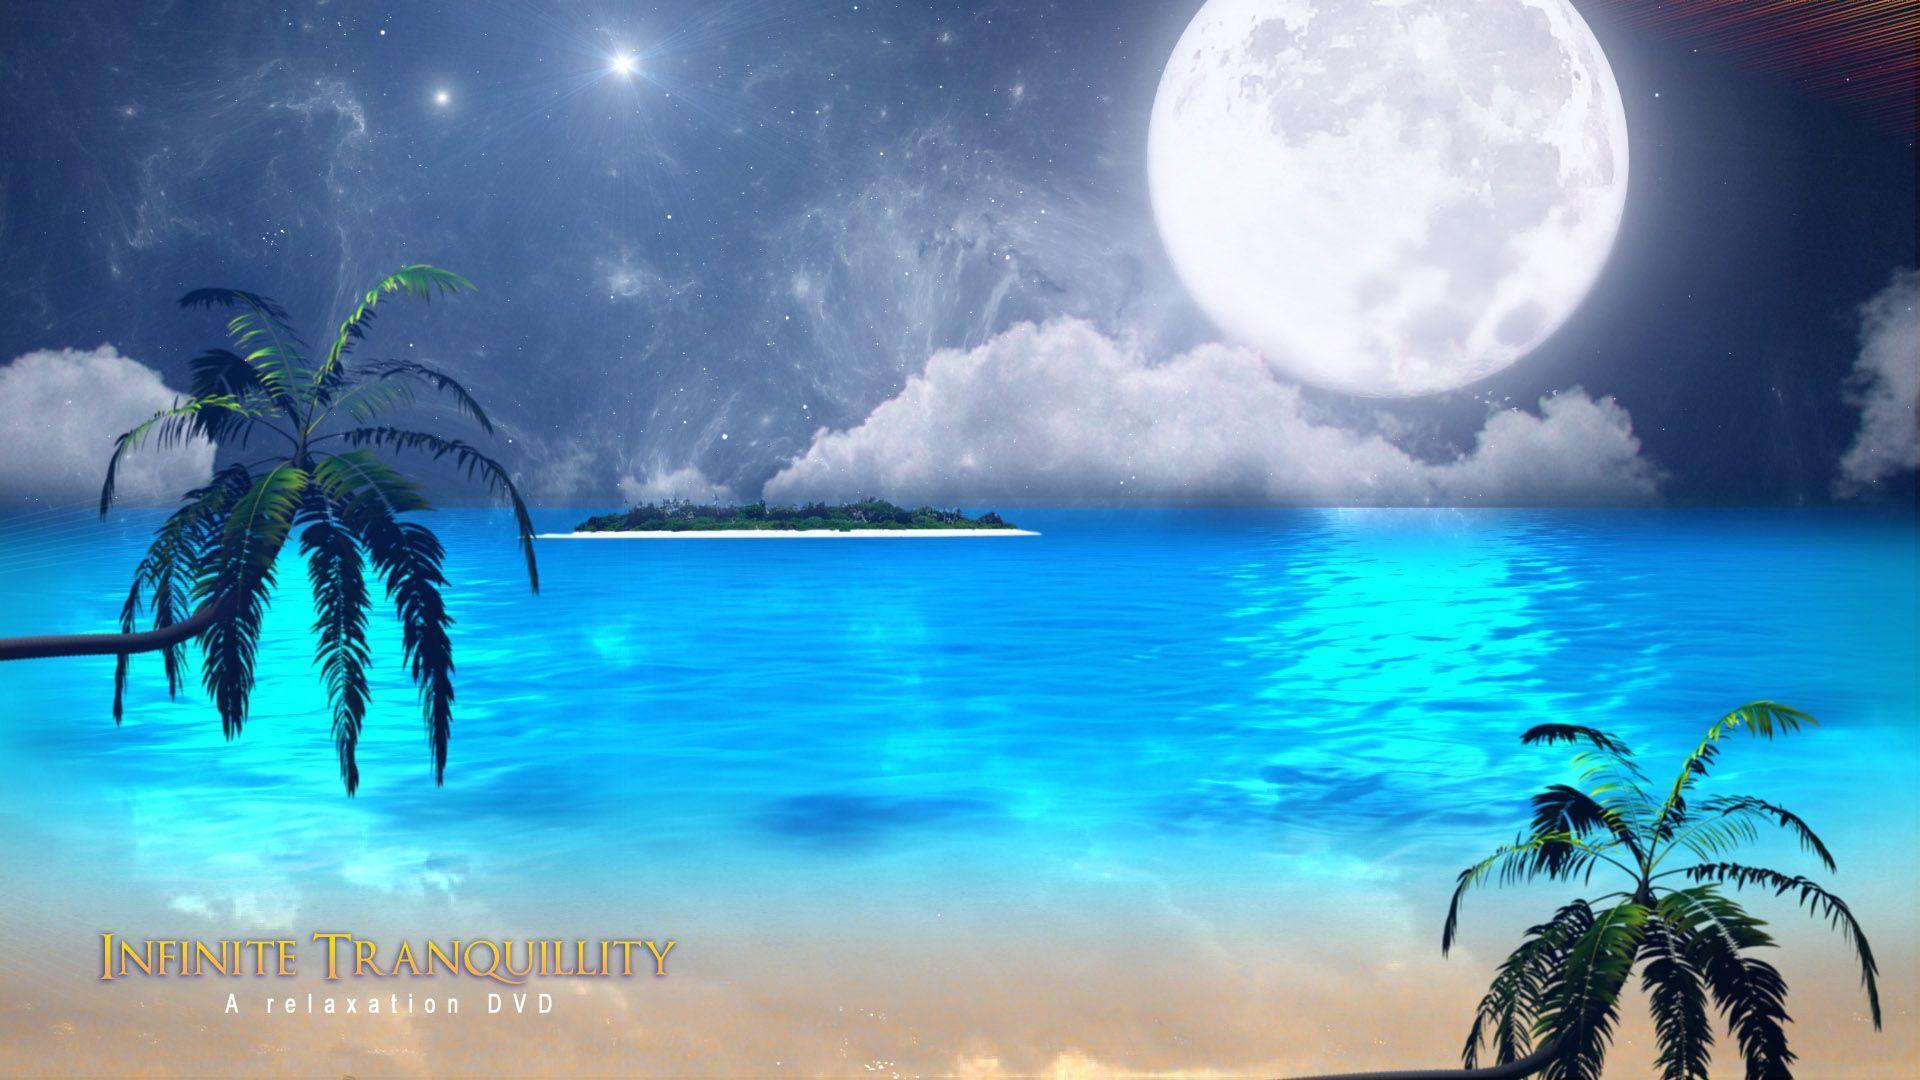 Infinite Tranquility. Download relaxation wallpaper